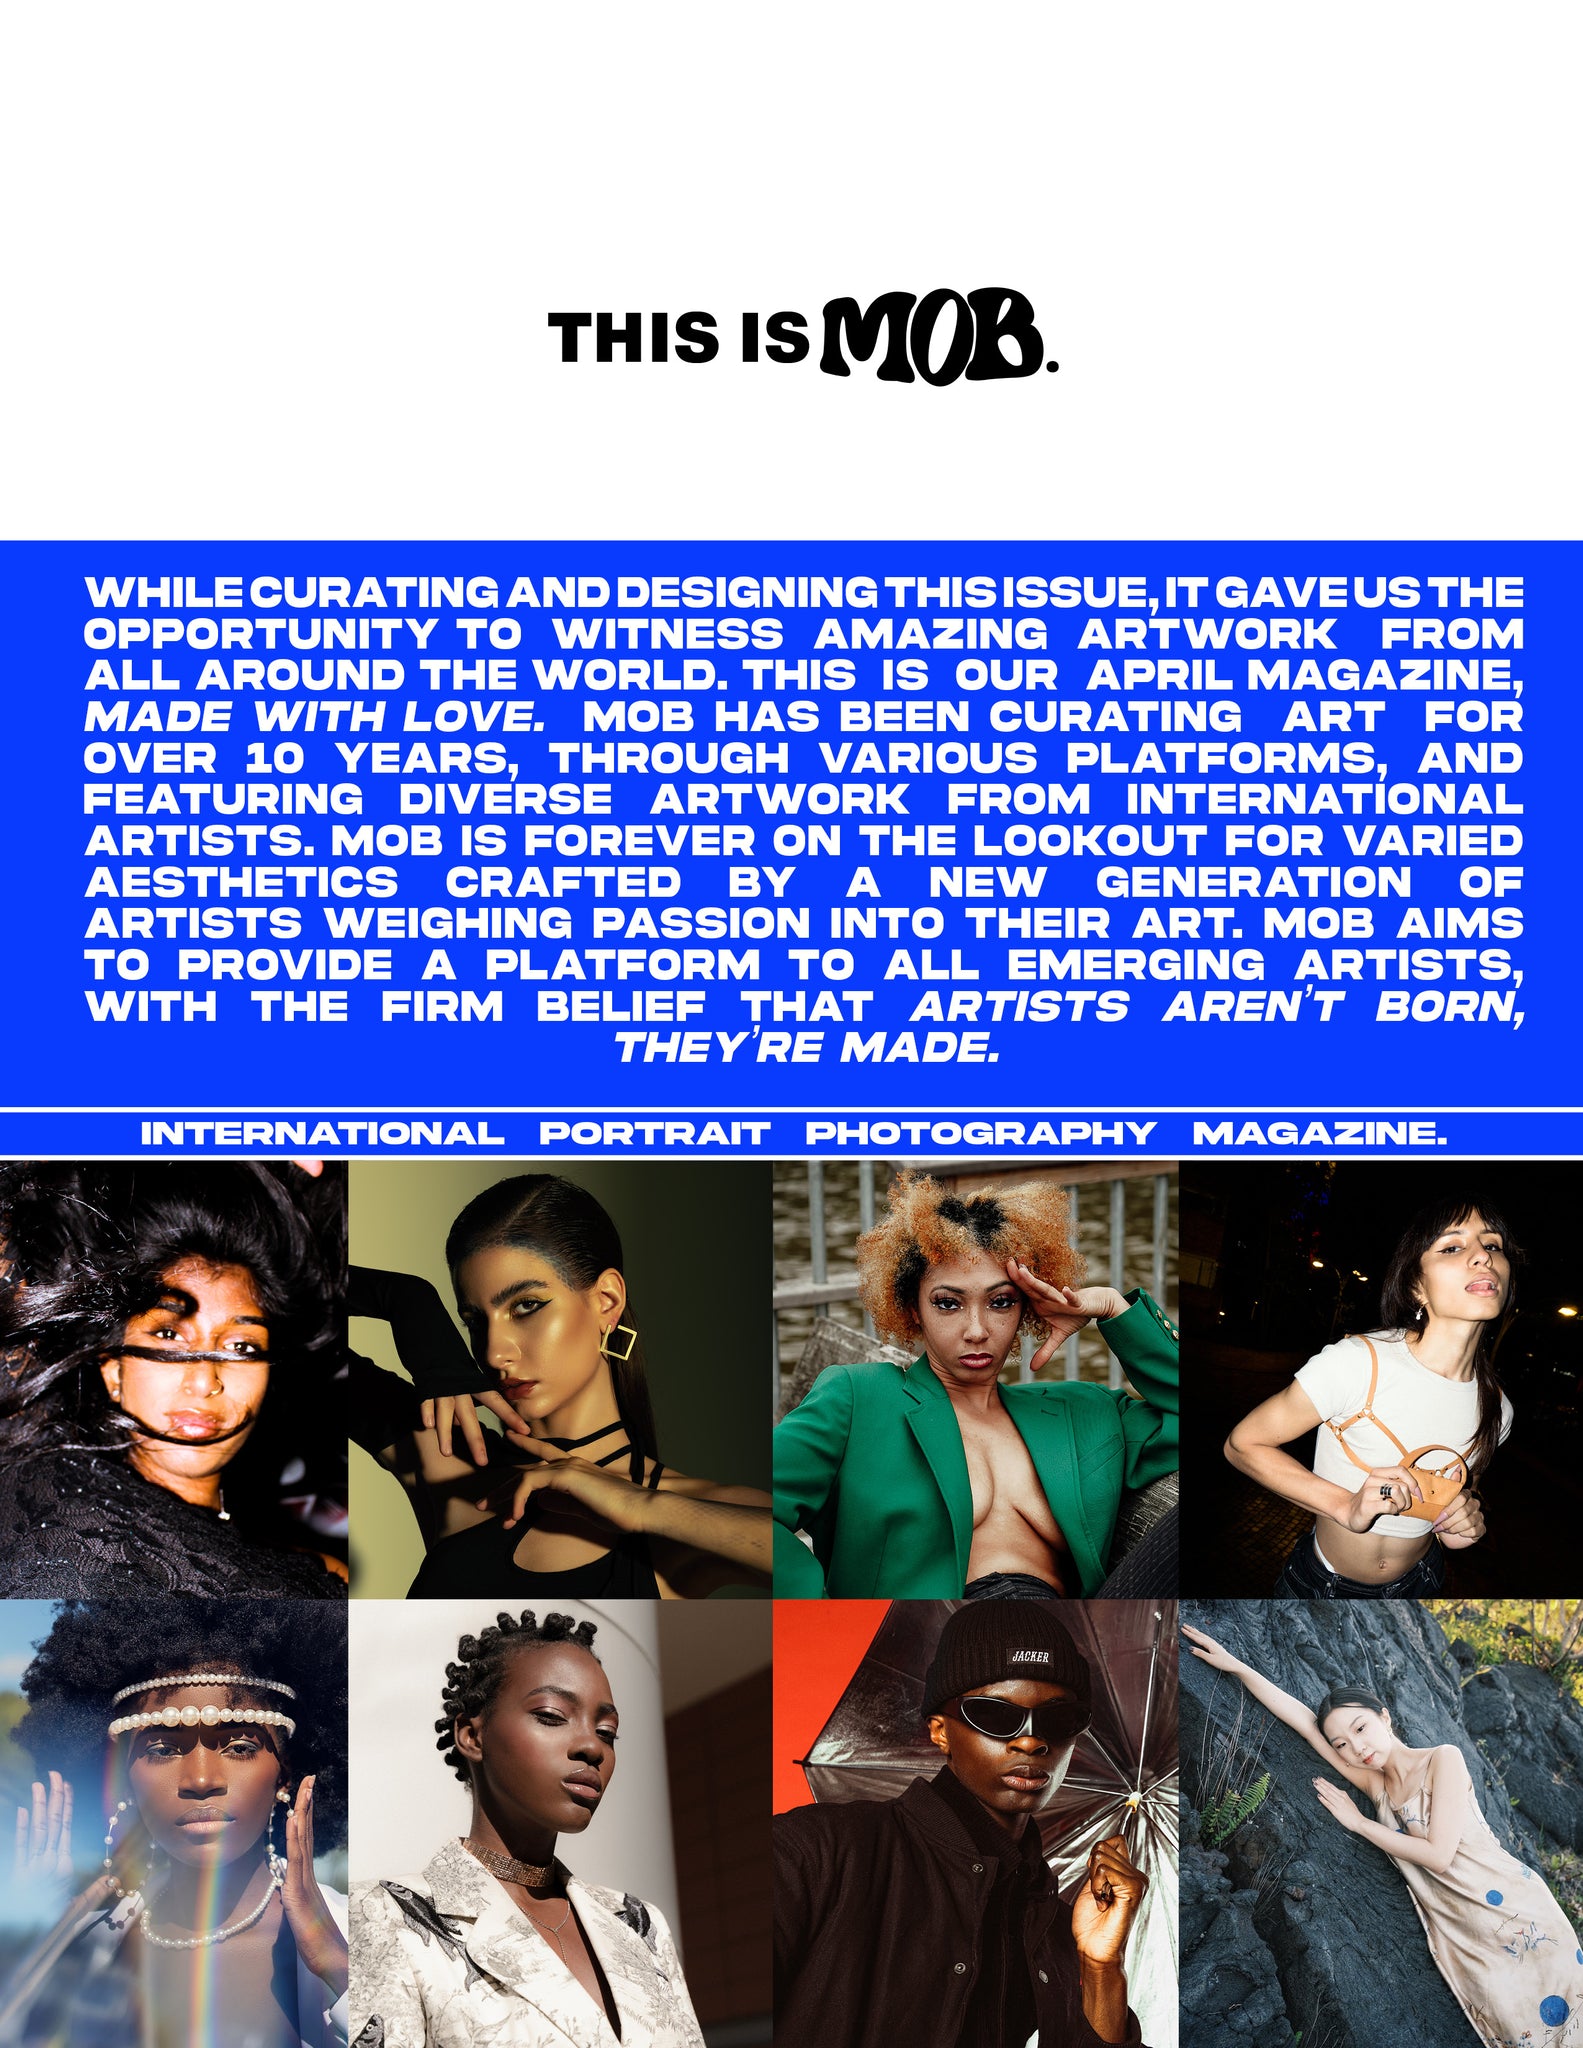 MOB JOURNAL | VOLUME THIRTY TWO | ISSUE #16